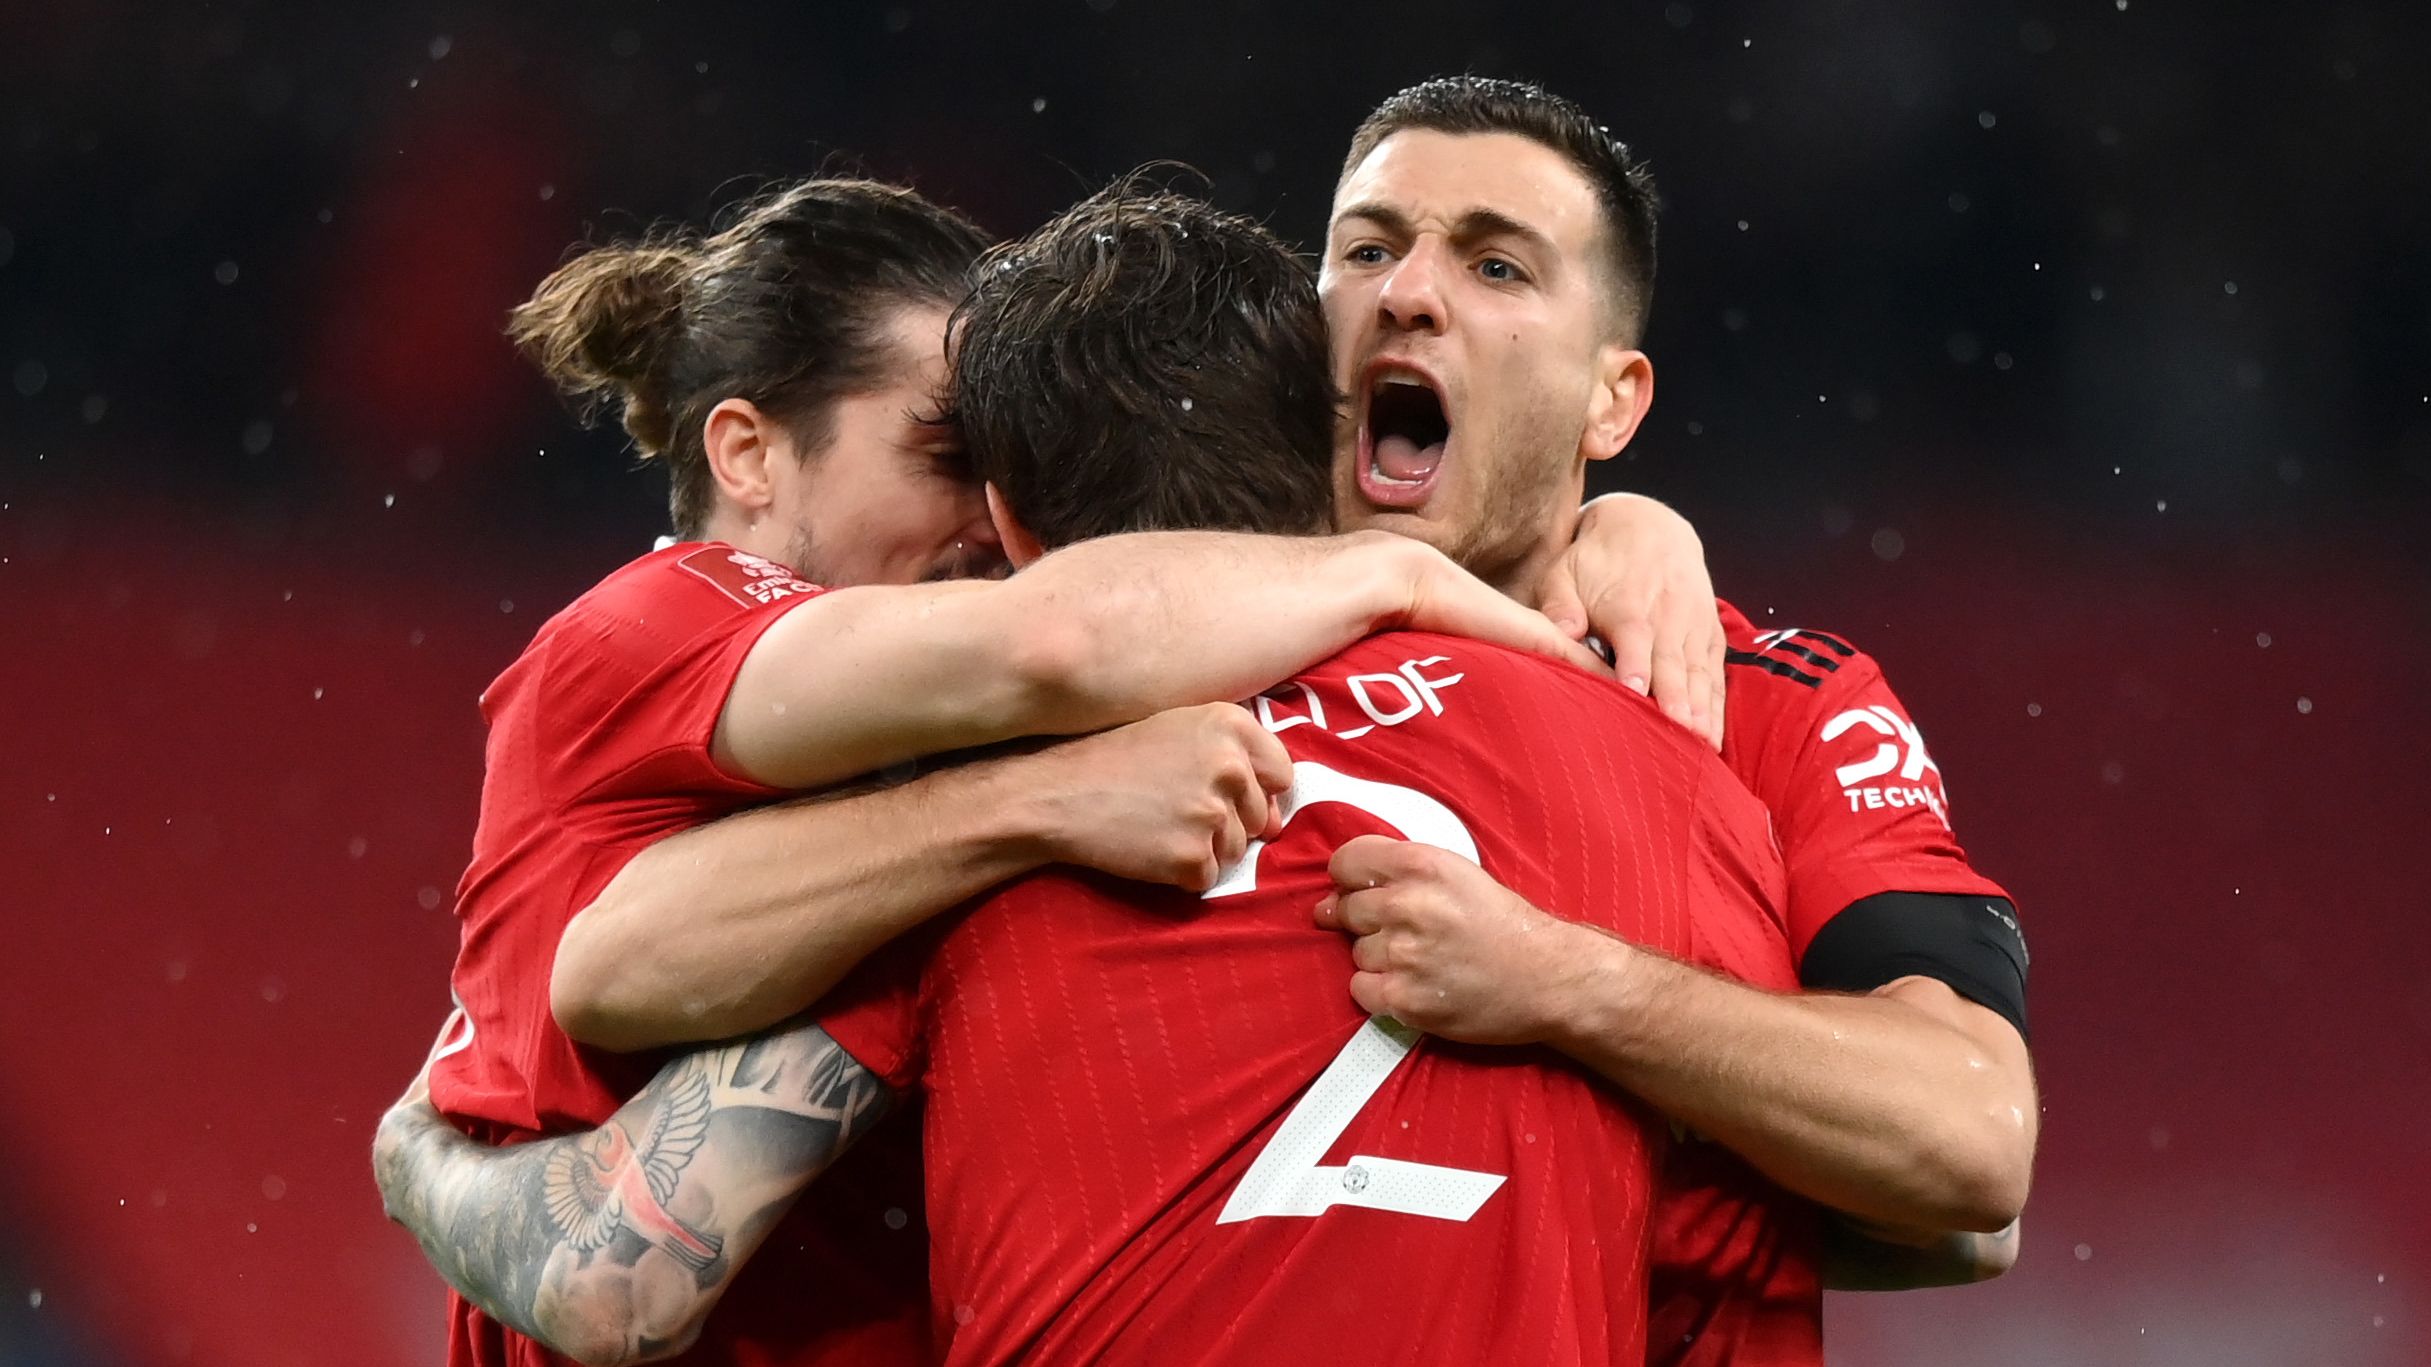 Diogo Dalot of Manchester United celebrates with Victor Lindelof of Manchester United after winning the penalty shootout in the Emirates FA Cup Semi Final match between Brighton &amp; Hove Albion v Manchester United at Wembley Stadium on April 23, 2023 in London, England. (Photo by Justin Setterfield - The FA/The FA via Getty Images)